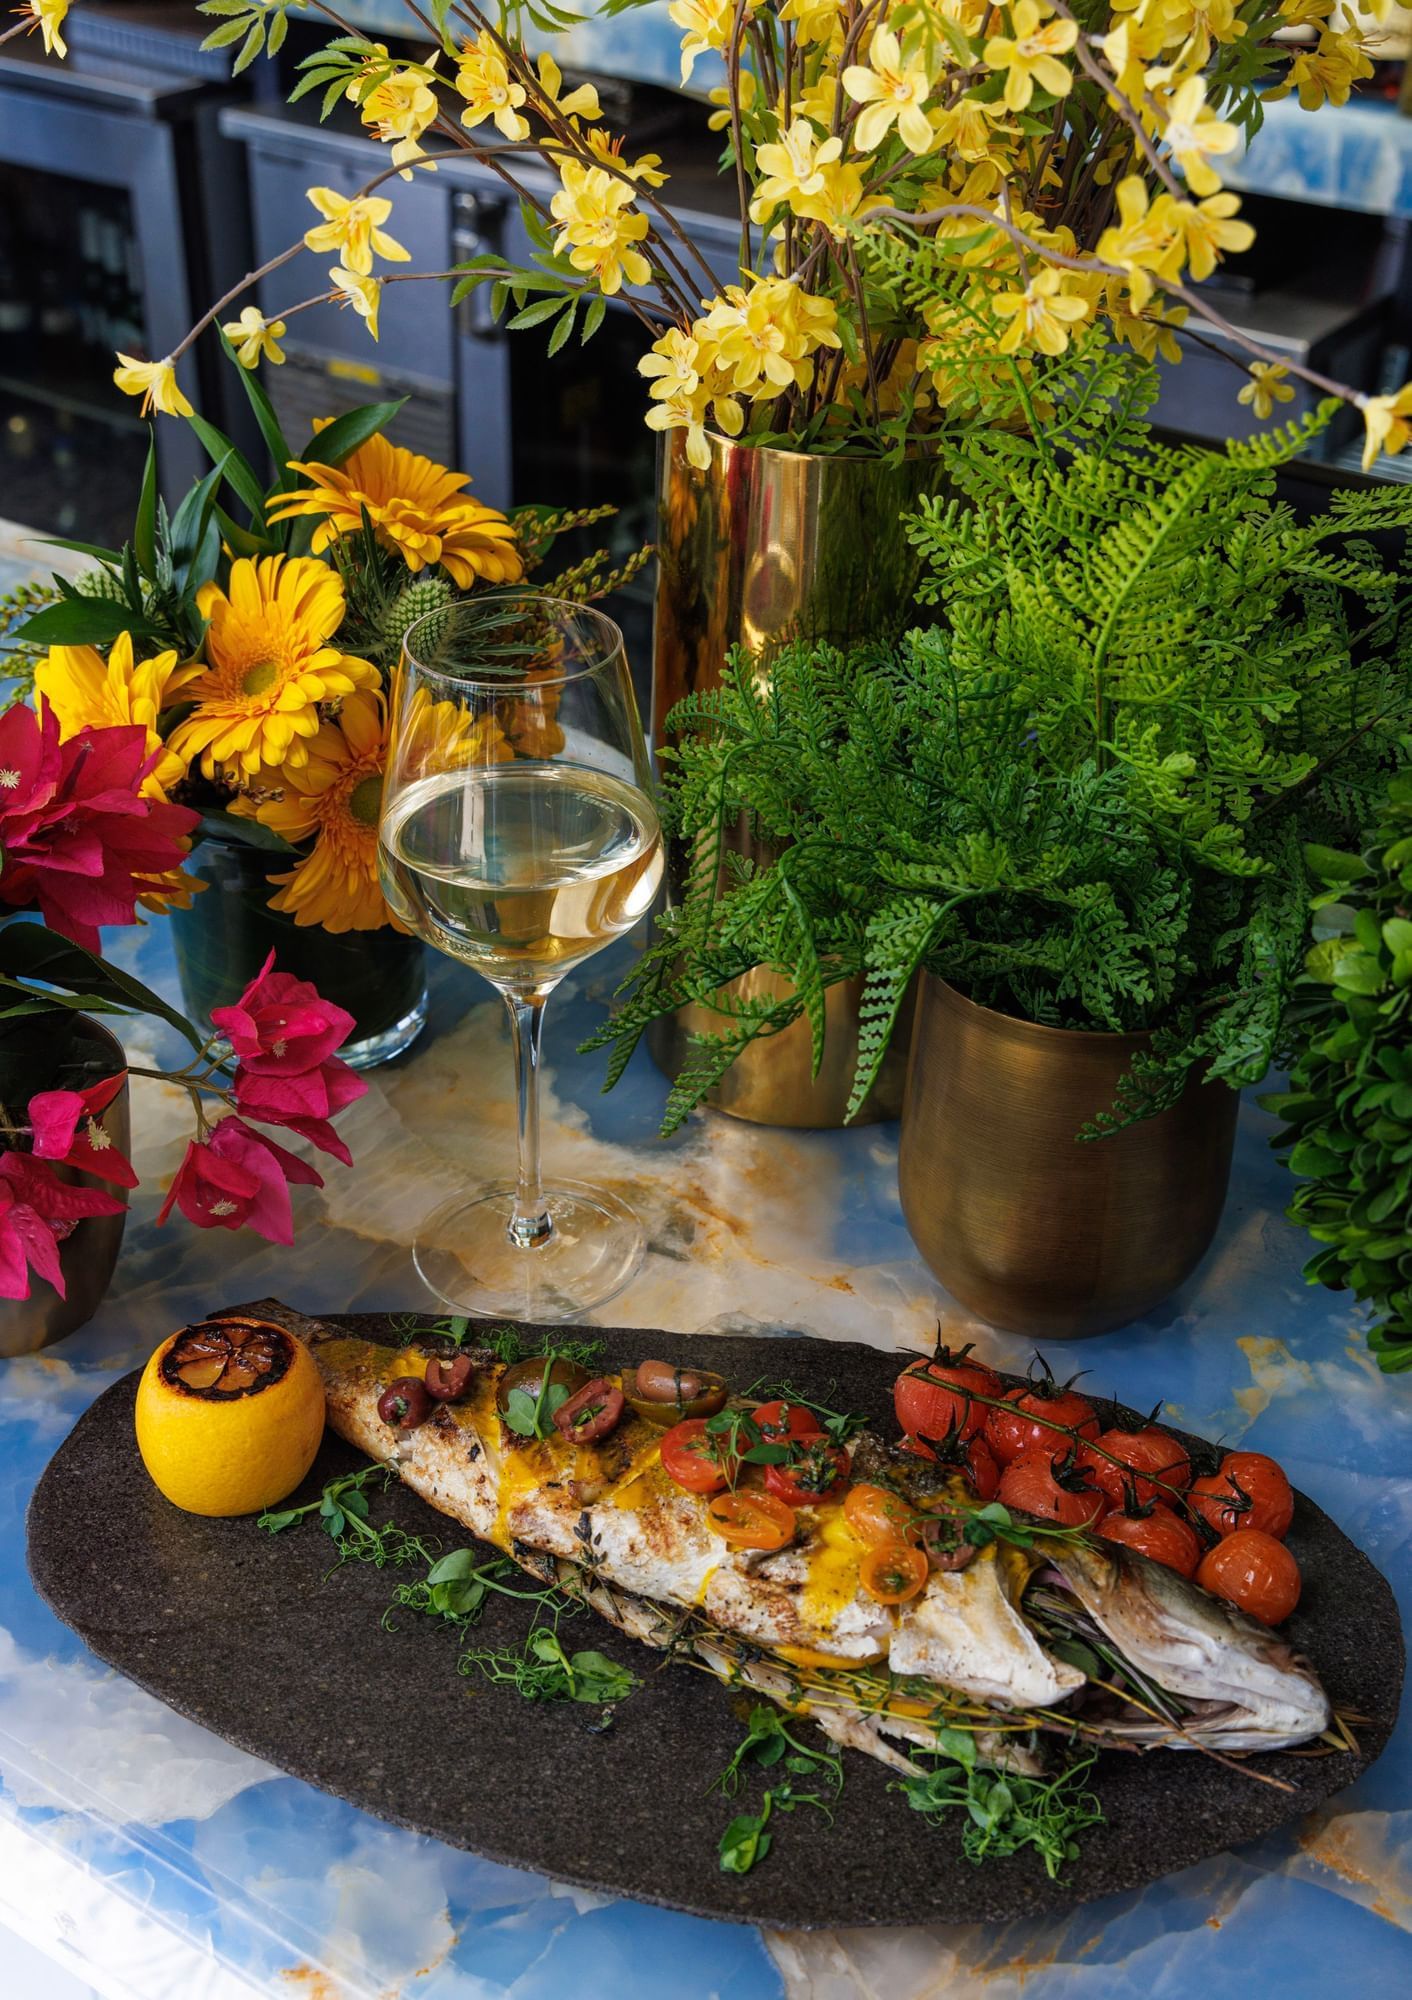 A plate of fish and flowers on a table with a glass of wine	